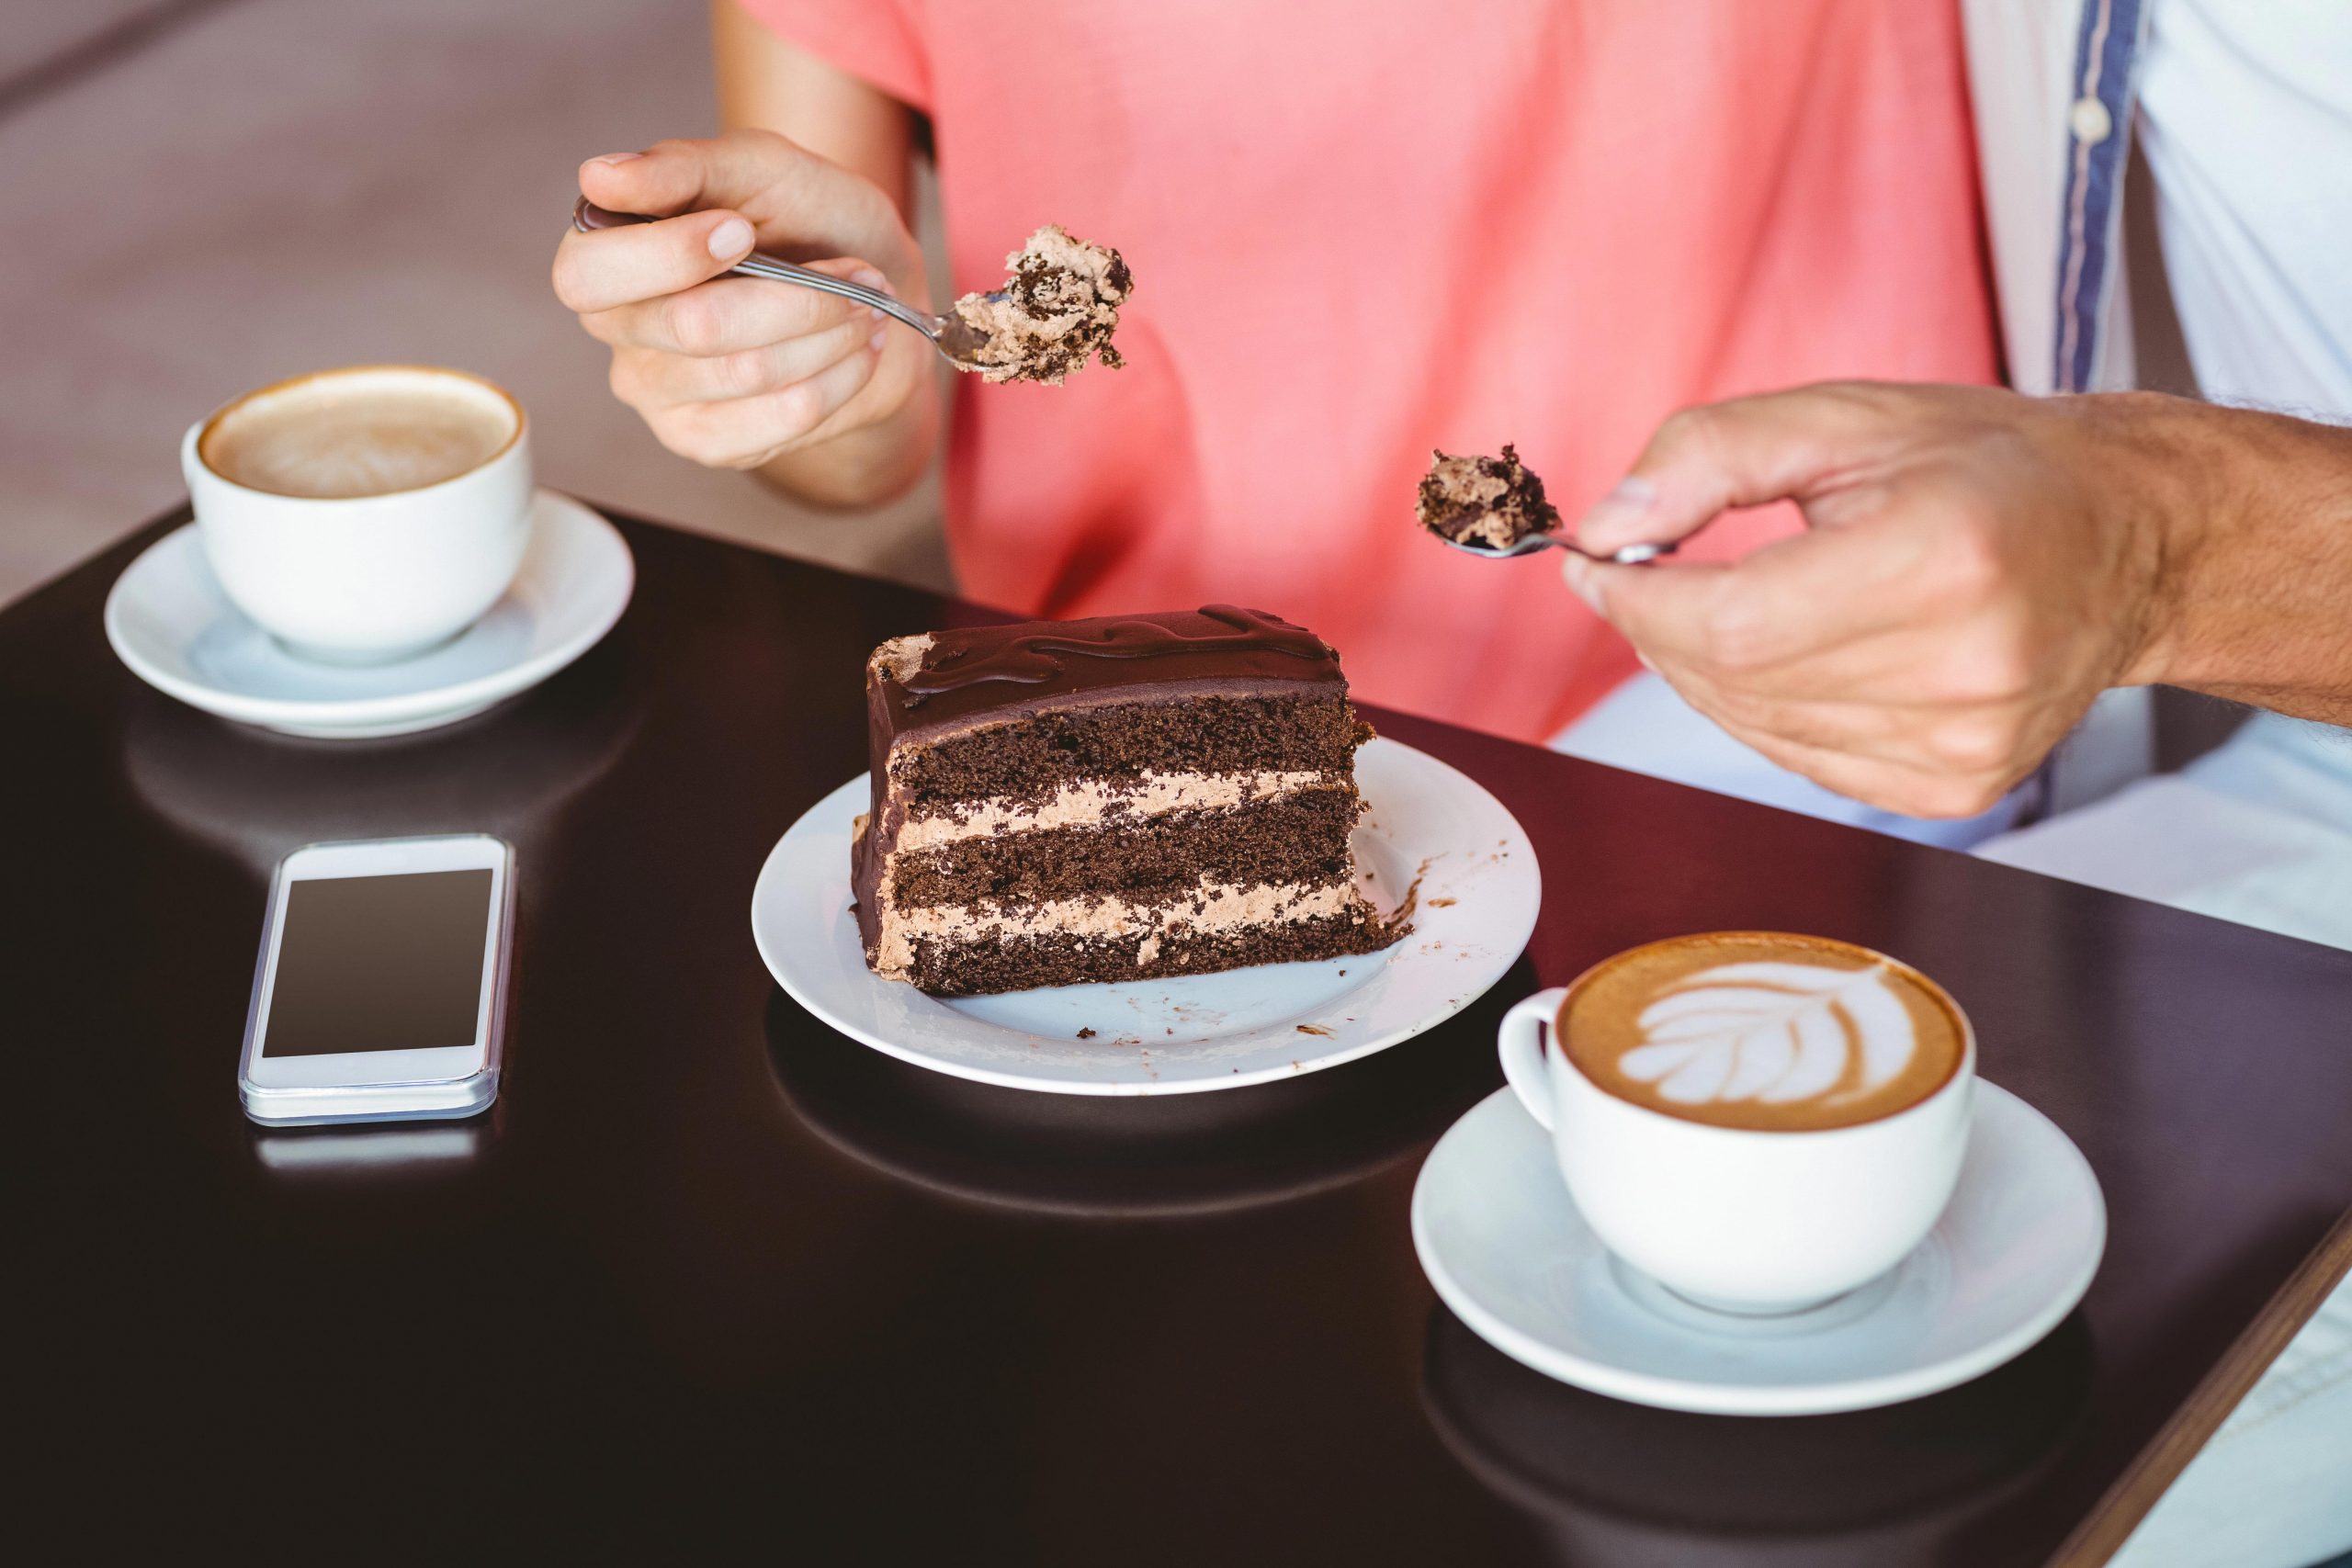 Shrink, Swap, Skip: How To Eat Healthier When Dining Out - cake, chocolate cake